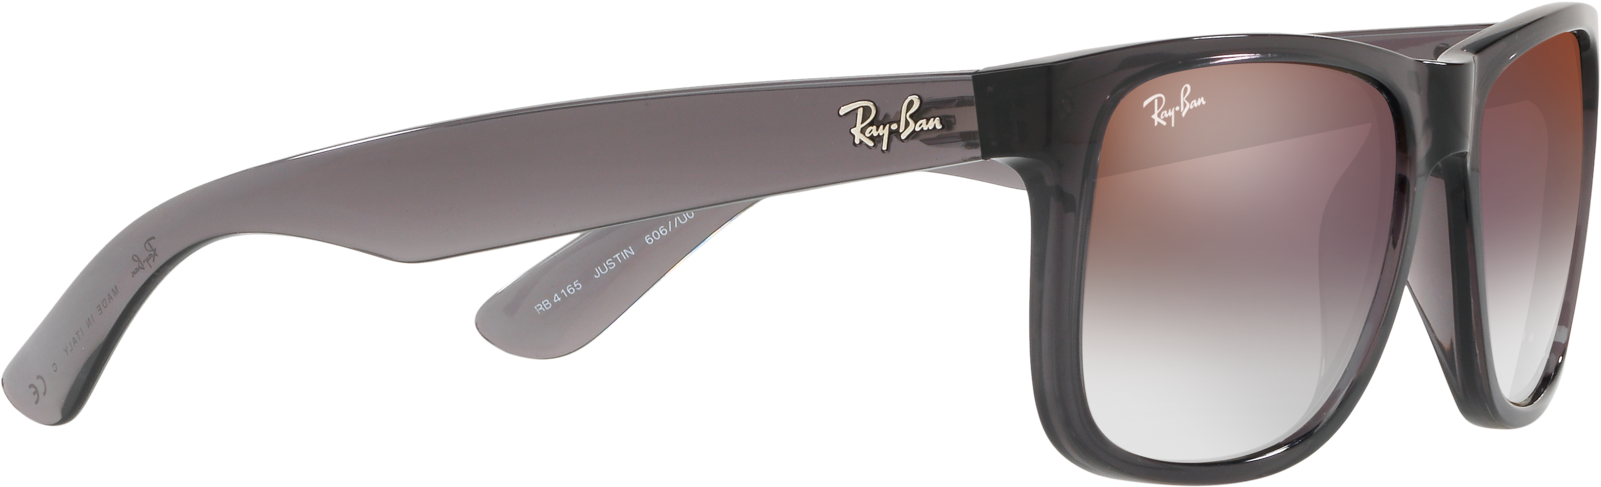 Ray Ban Justin Trasparent Grey Lente Gradient Mirror - Ray-ban Justin Classic (2000x1000), Png Download